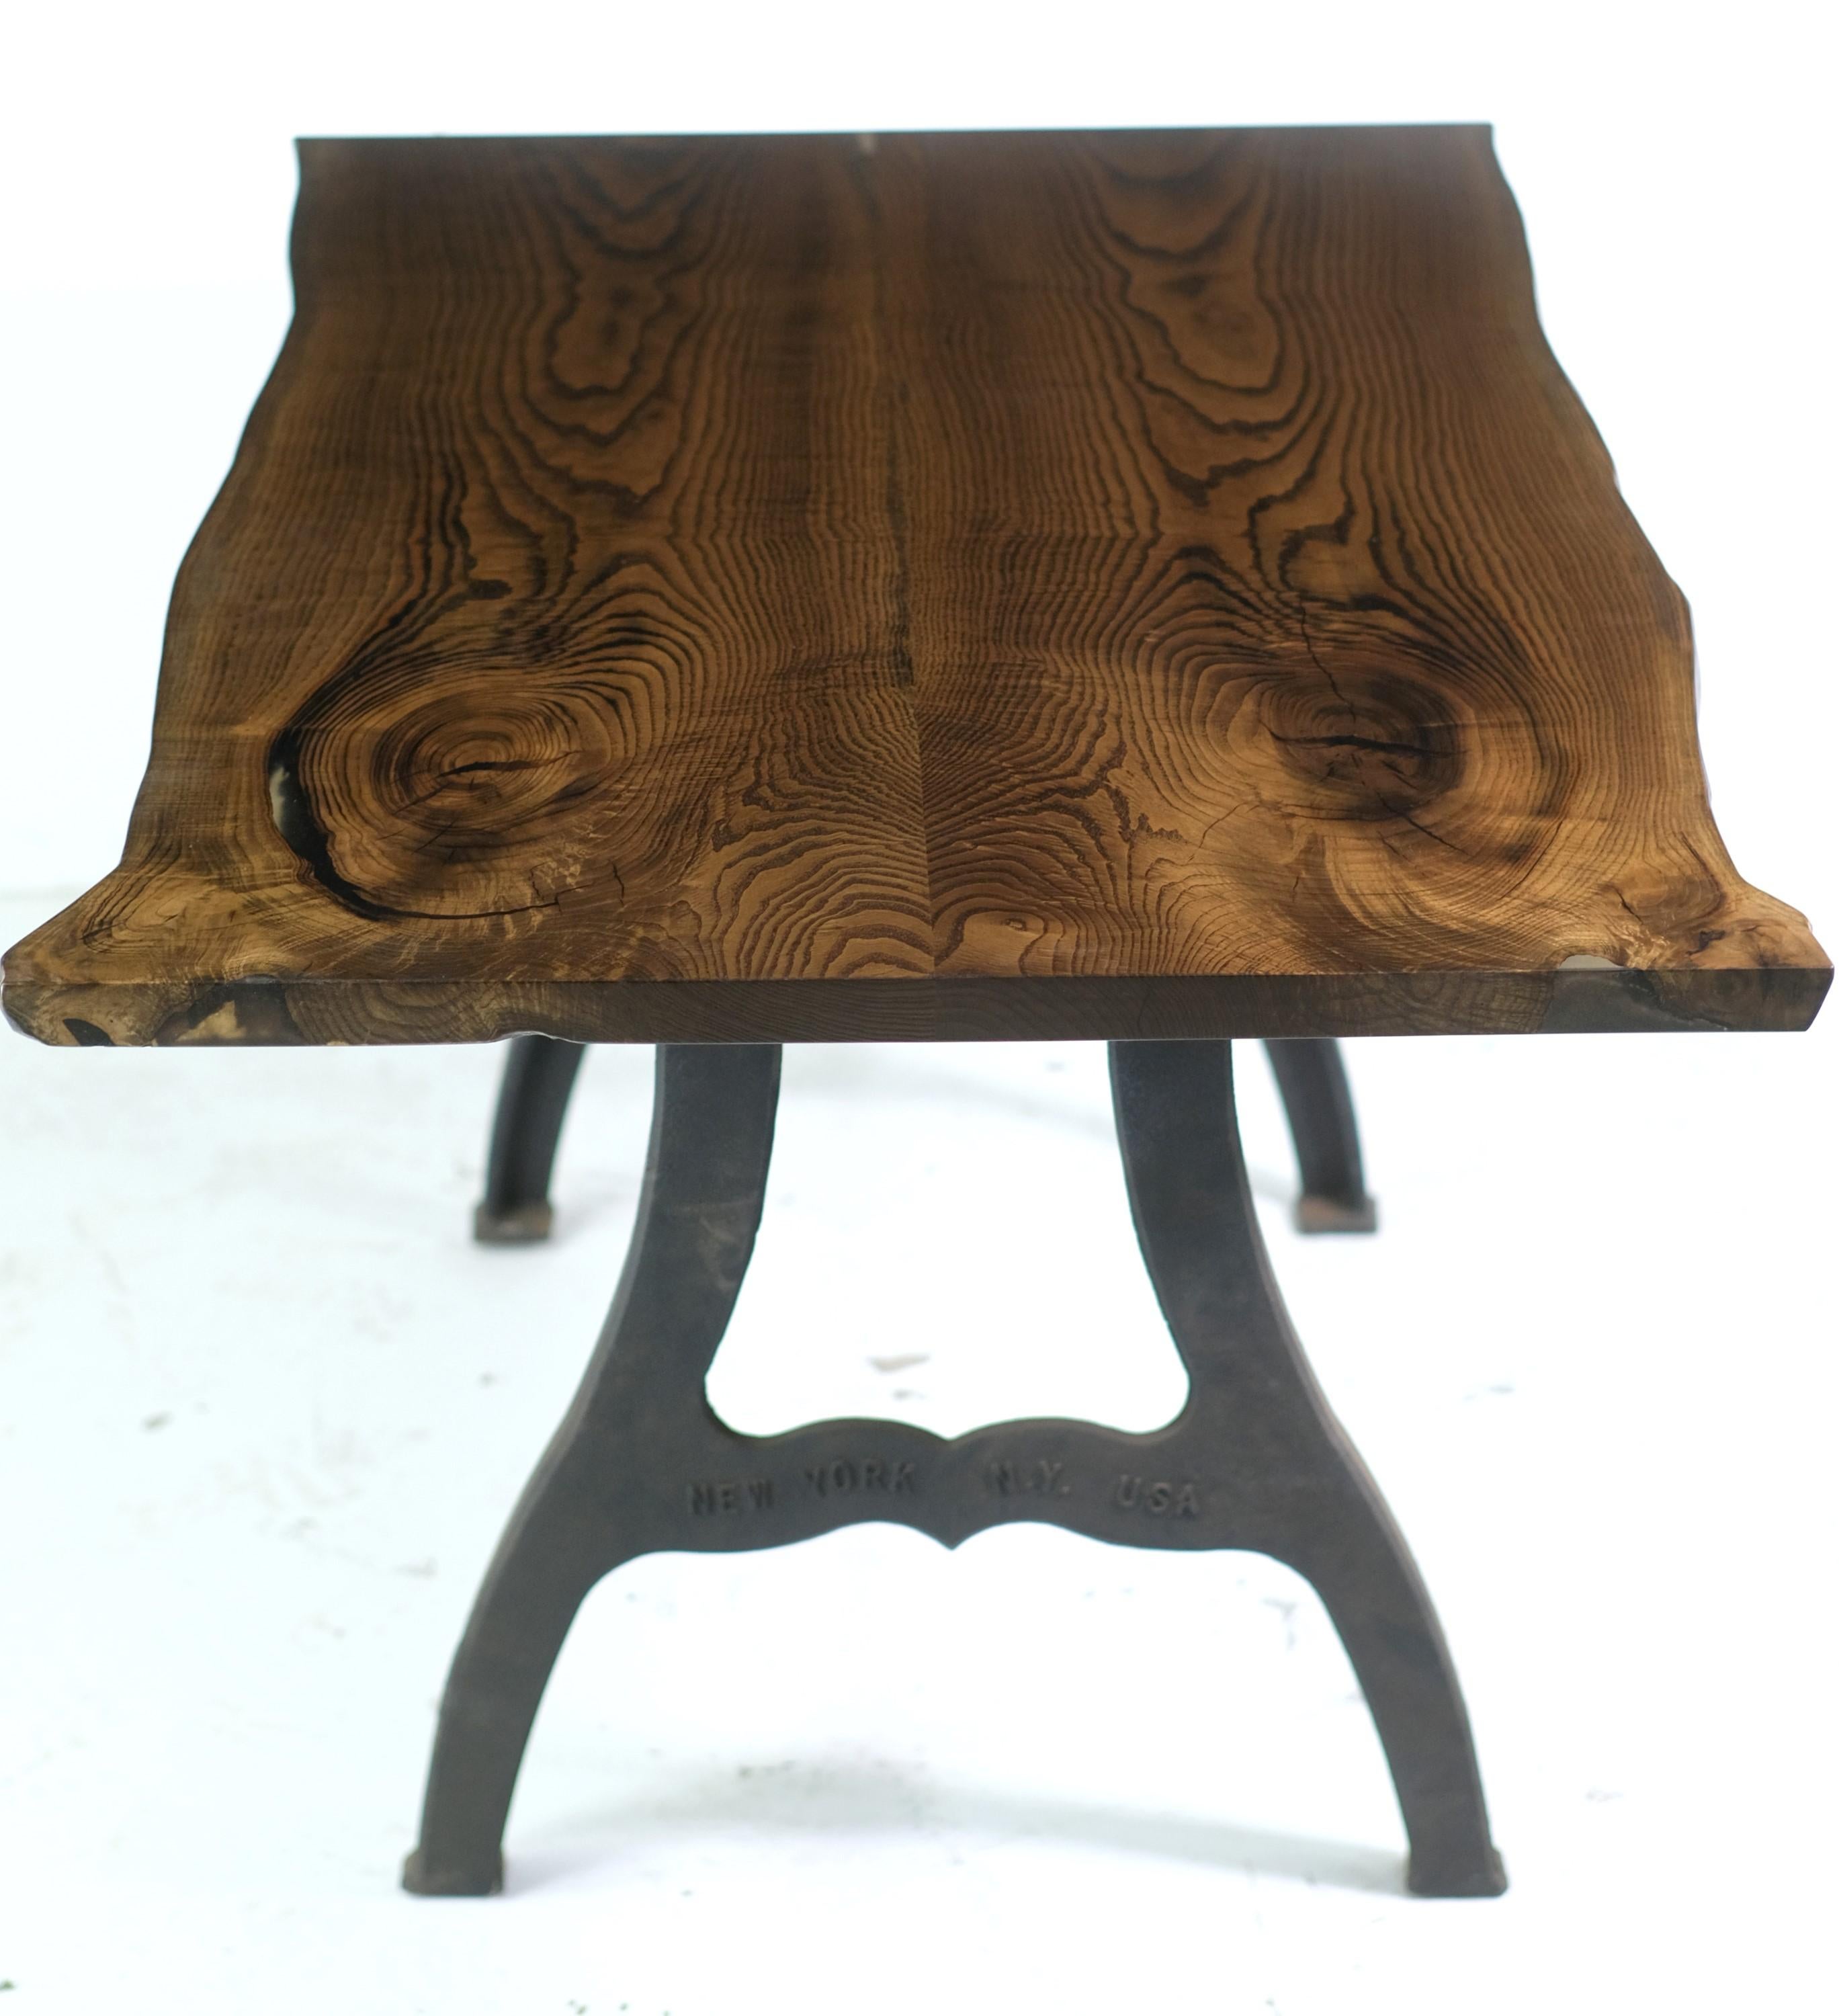 Iron 5 ft Solid Chestnut Live Edge New York Legs Dining Table For Sale